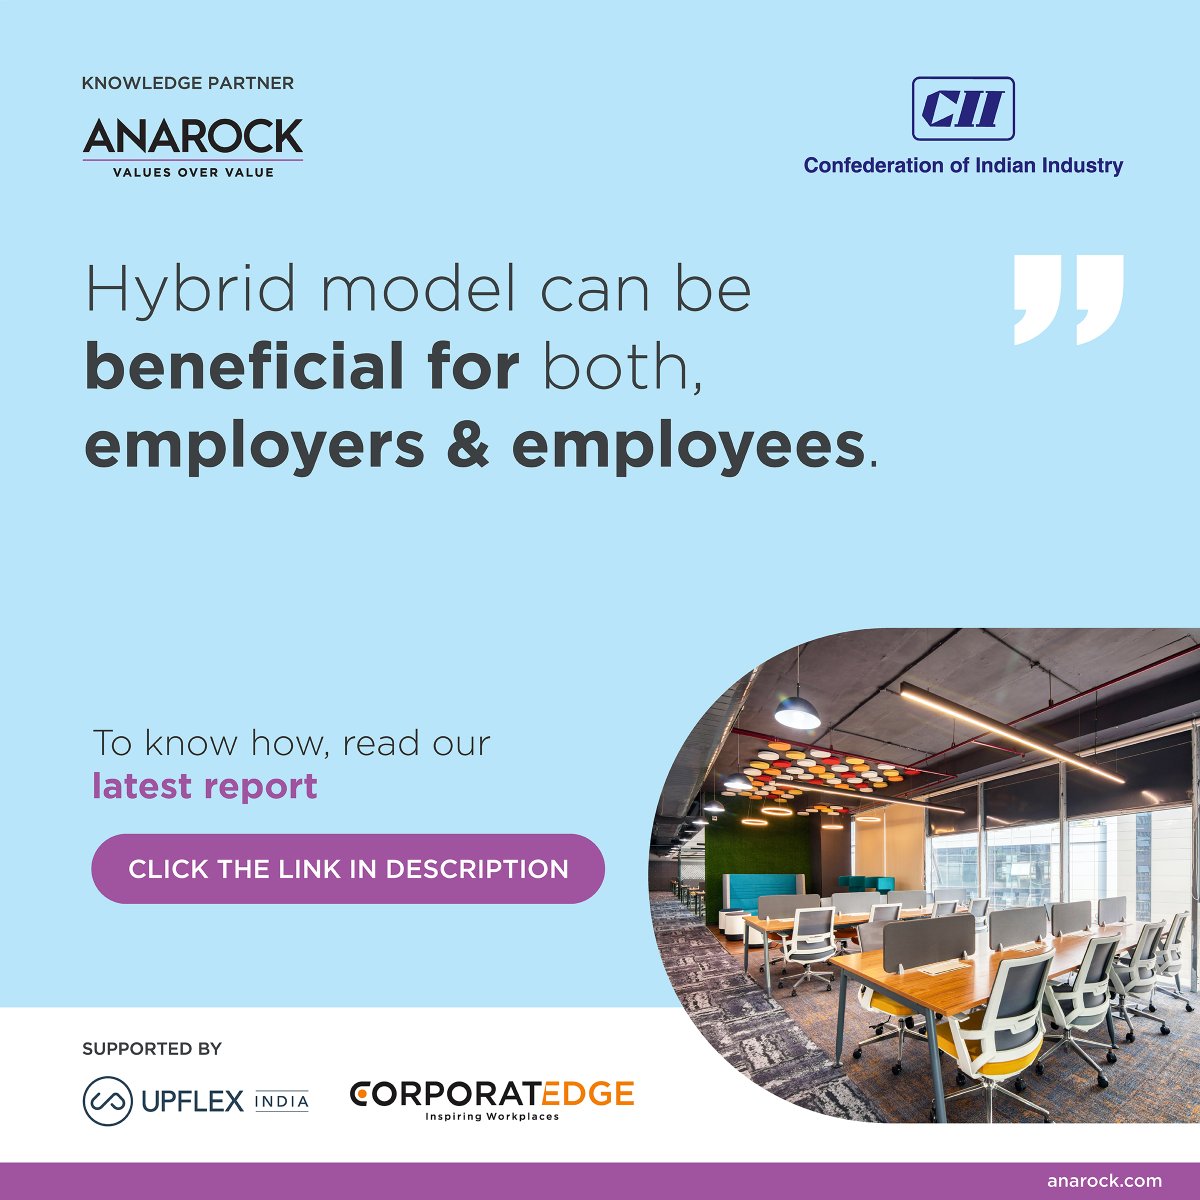 ANAROCK report predicts that hybrid work models could potentially double the market size of coworking spaces. Click here to read #CIIxANAROCK Report - Workplaces Of The Future: lnkd.in/d9CZUyt3
@FollowCII @TheAnujPuri 
#workspacesolutions #UpflexIndia #futureisflexible